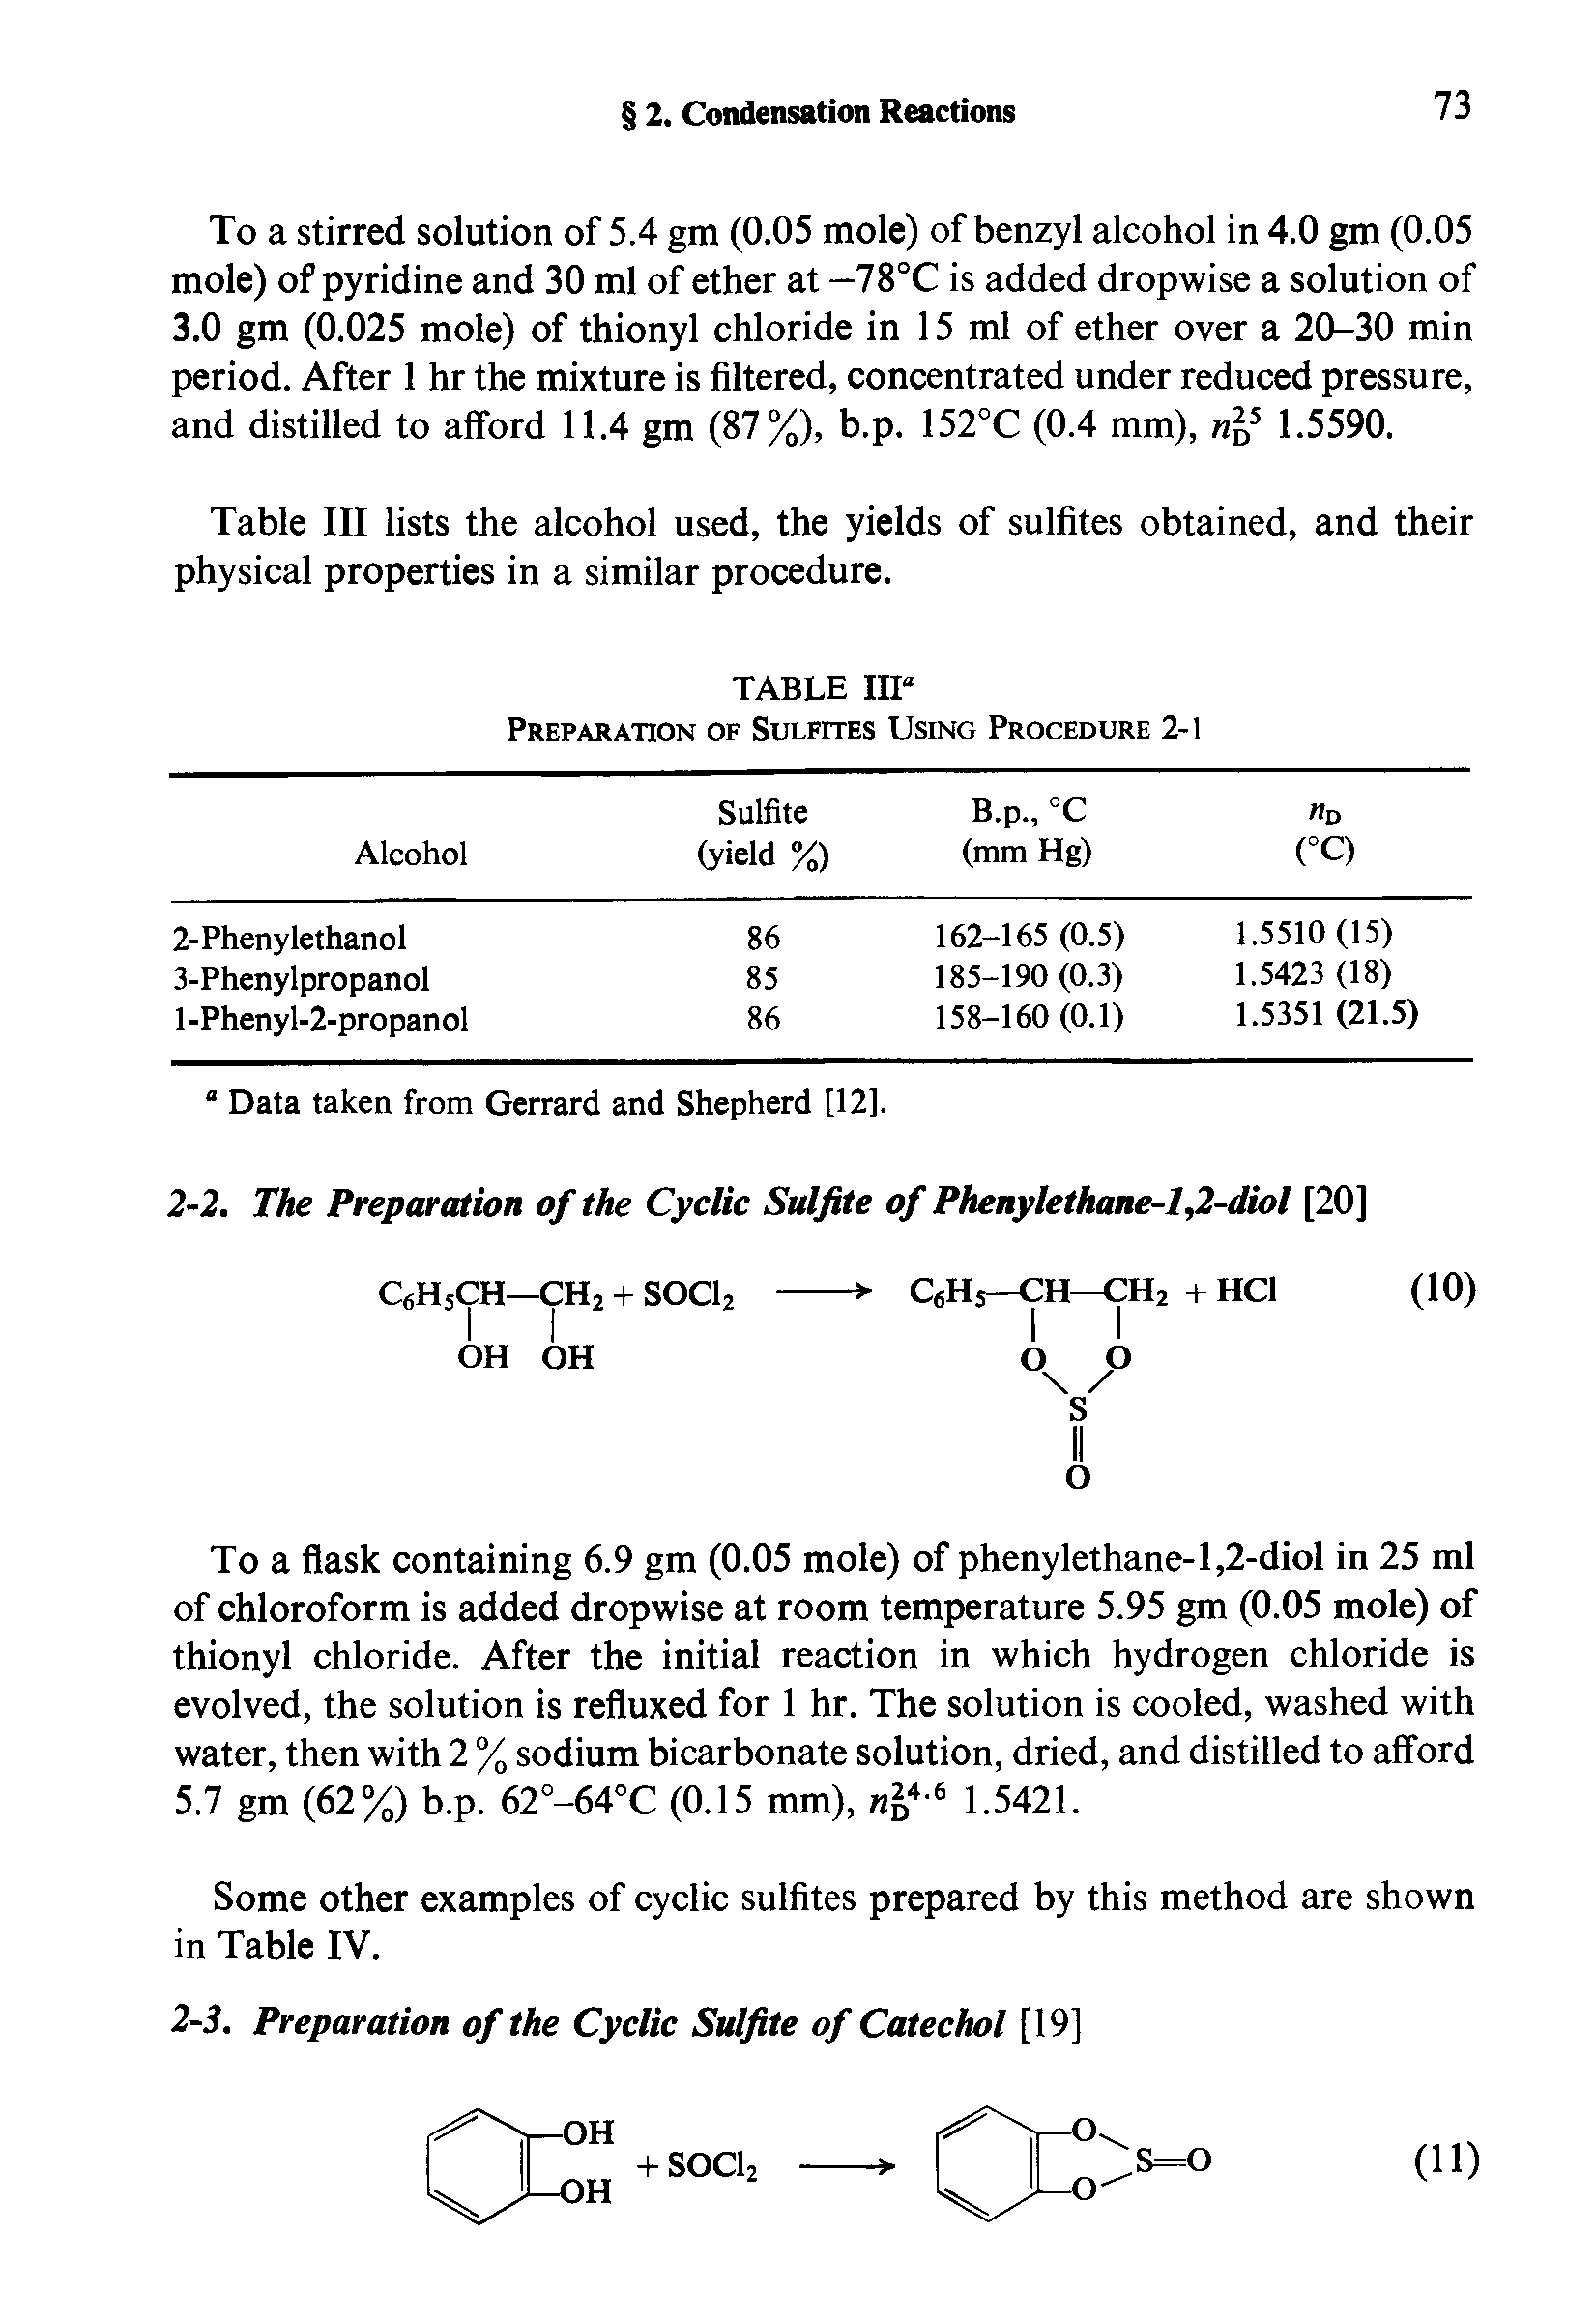 Table III lists the alcohol used, the yields of sulfites obtained, and their physical properties in a similar procedure.